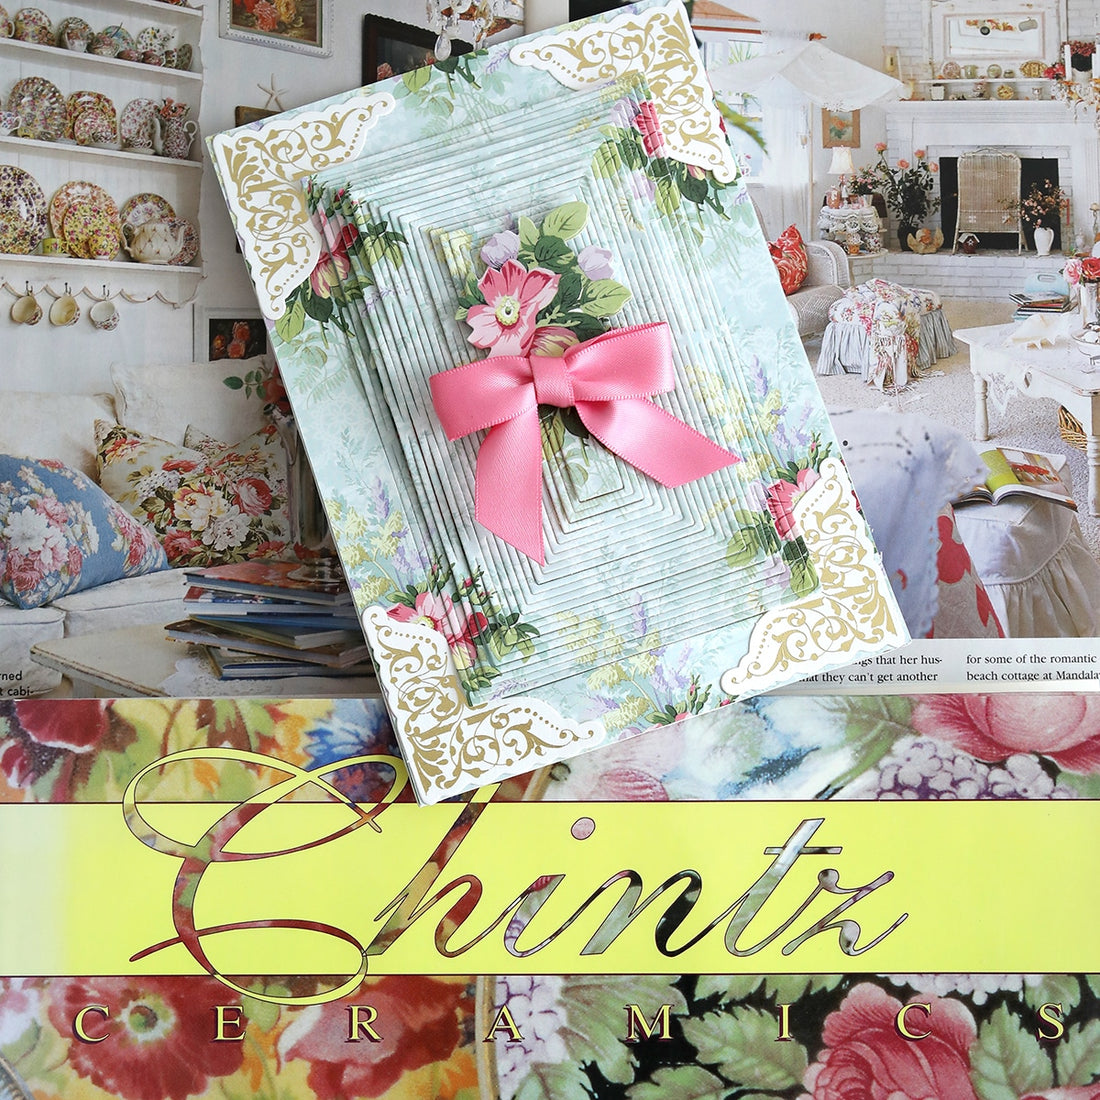 A card with a pink bow and flowers on it.